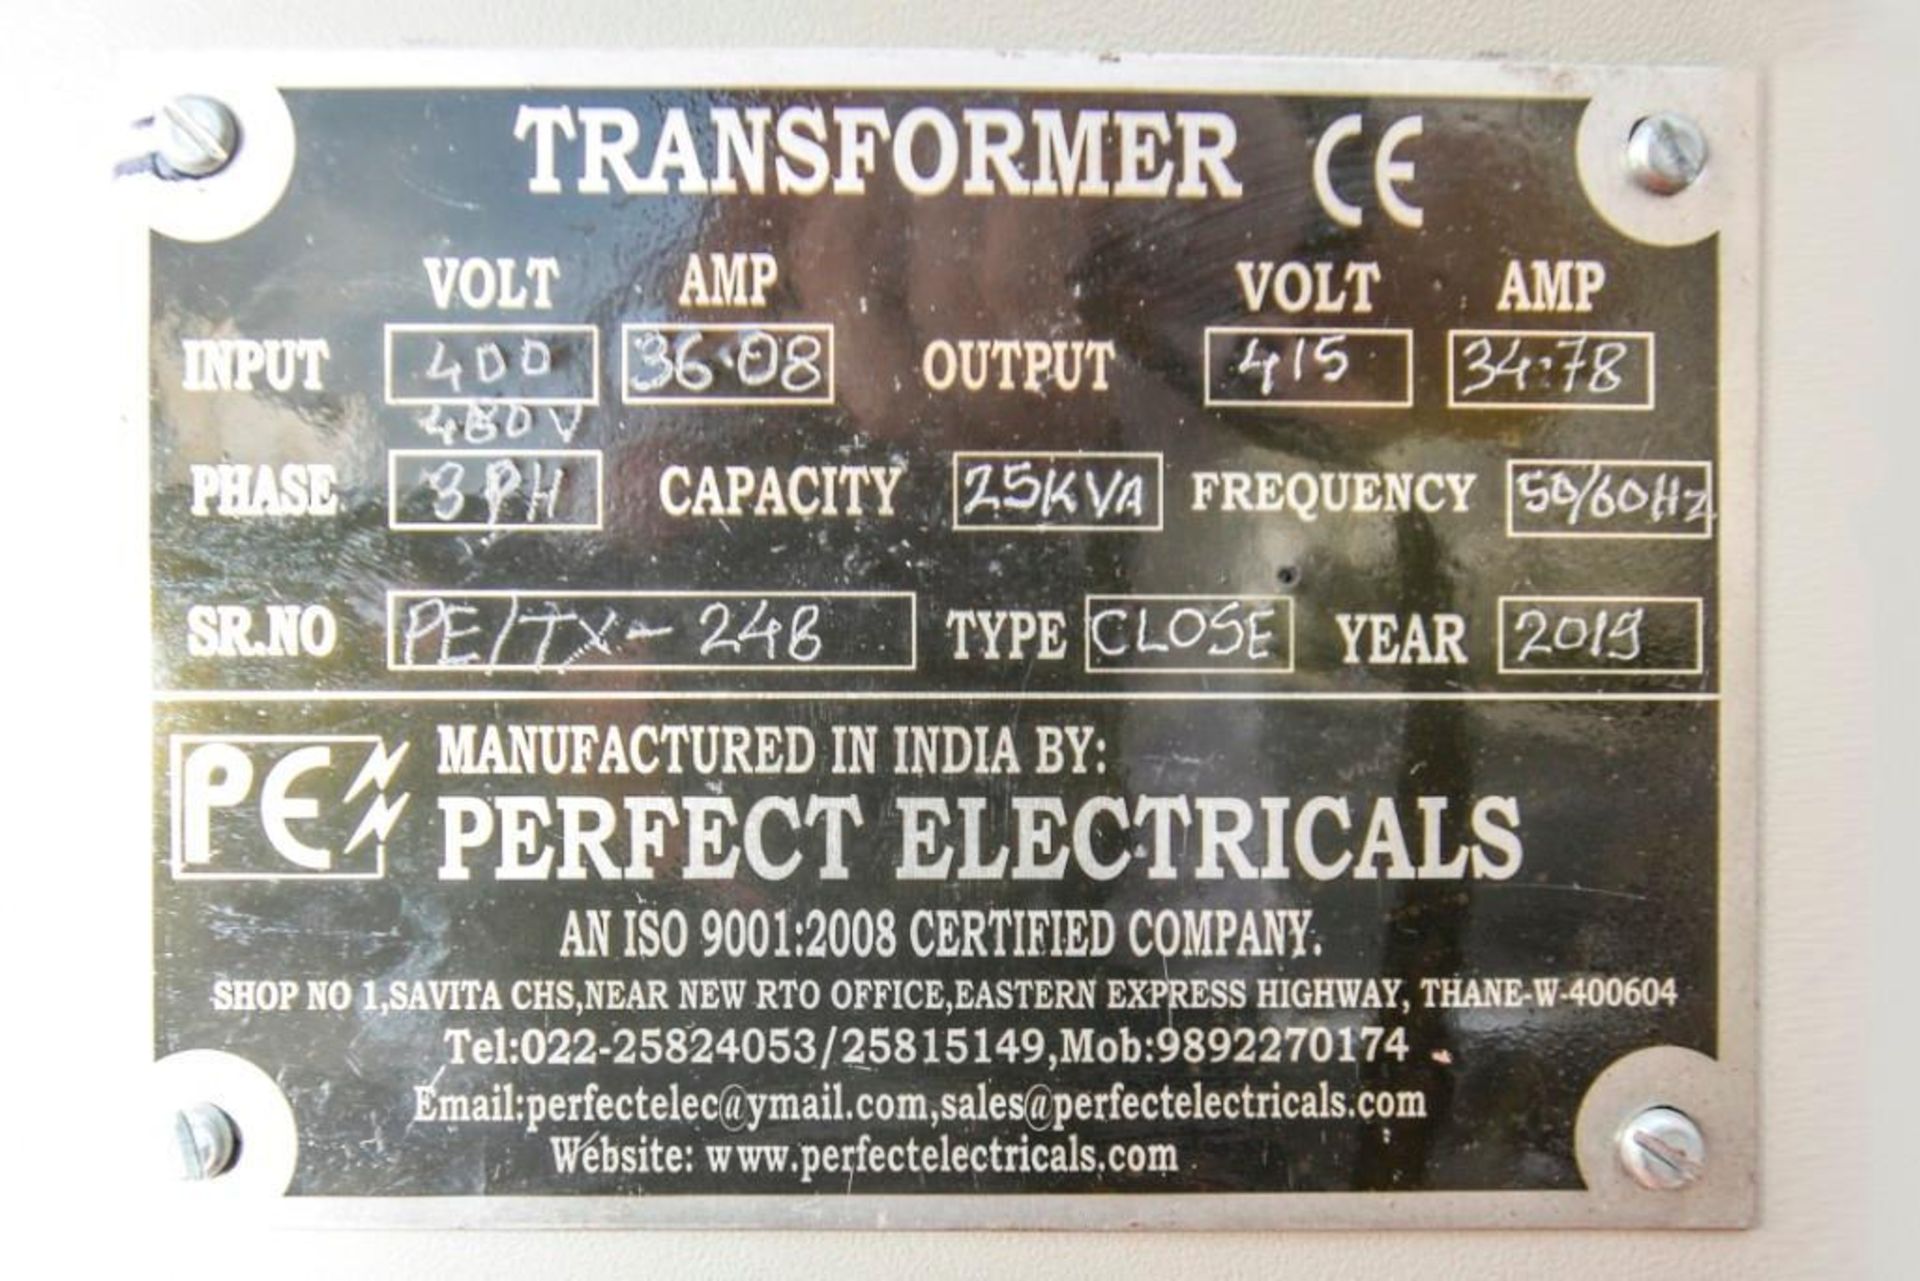 Perfect Electricals Transformer - Image 2 of 2